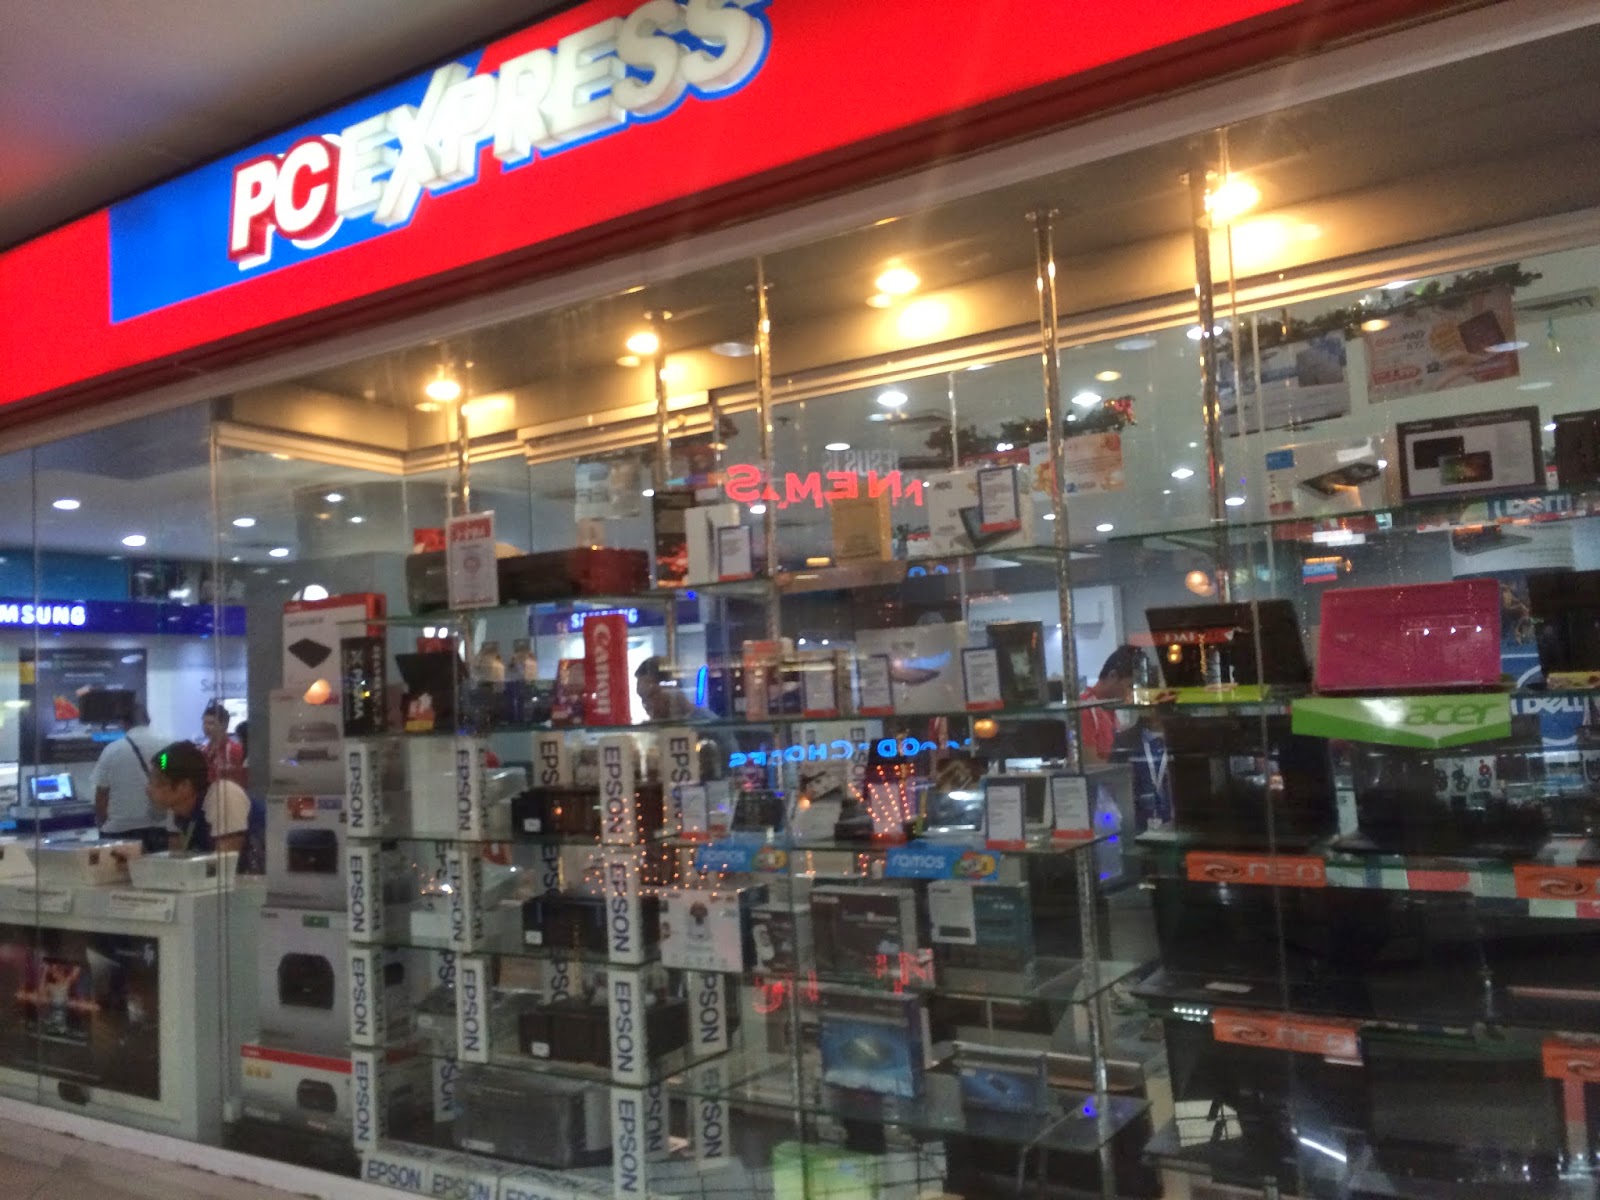 Retail Store PC Express